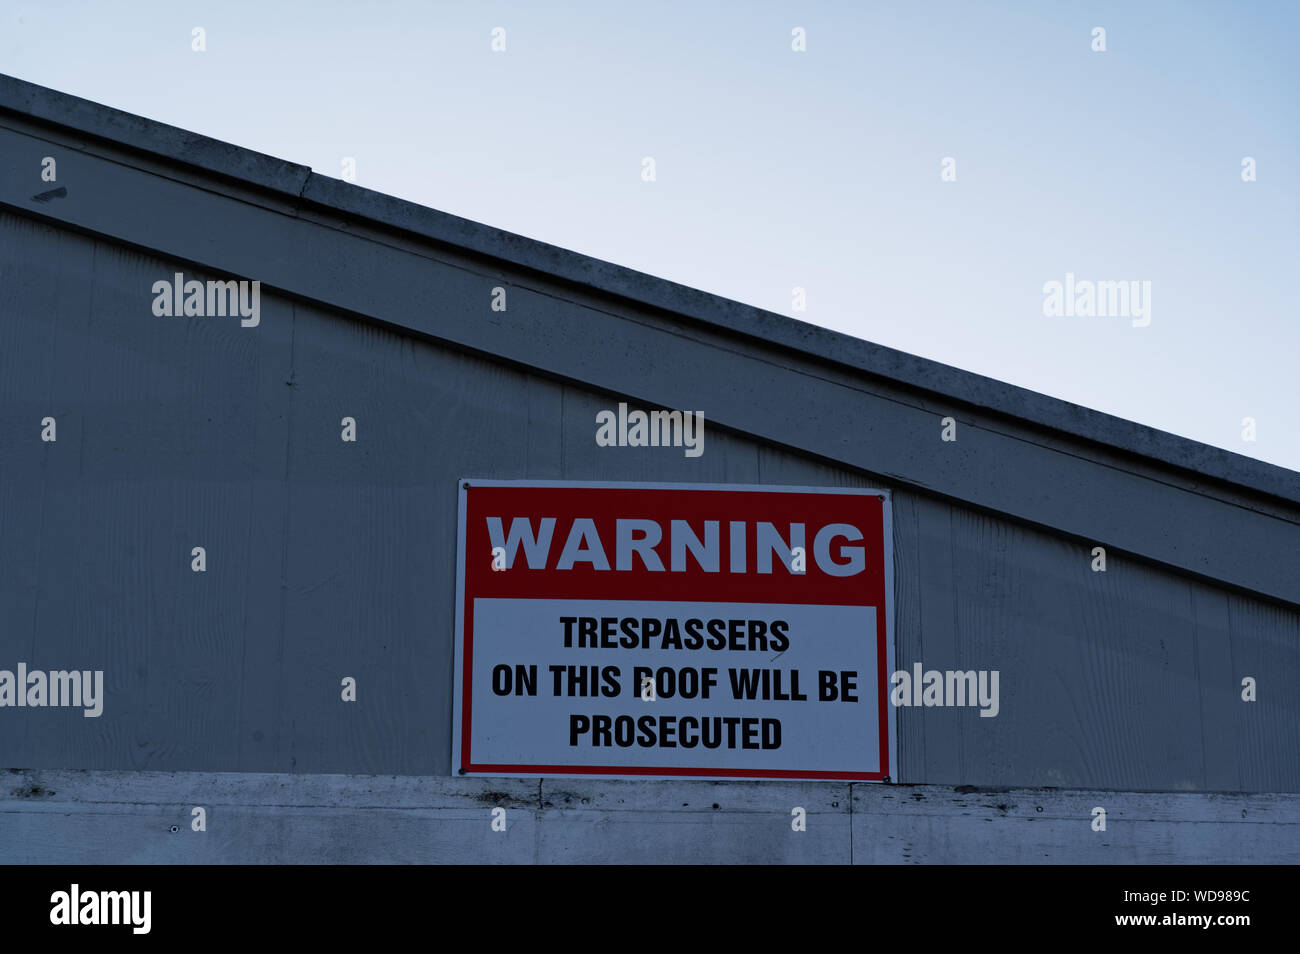 People are warned not to climb on the roof by this sign on a building Stock Photo